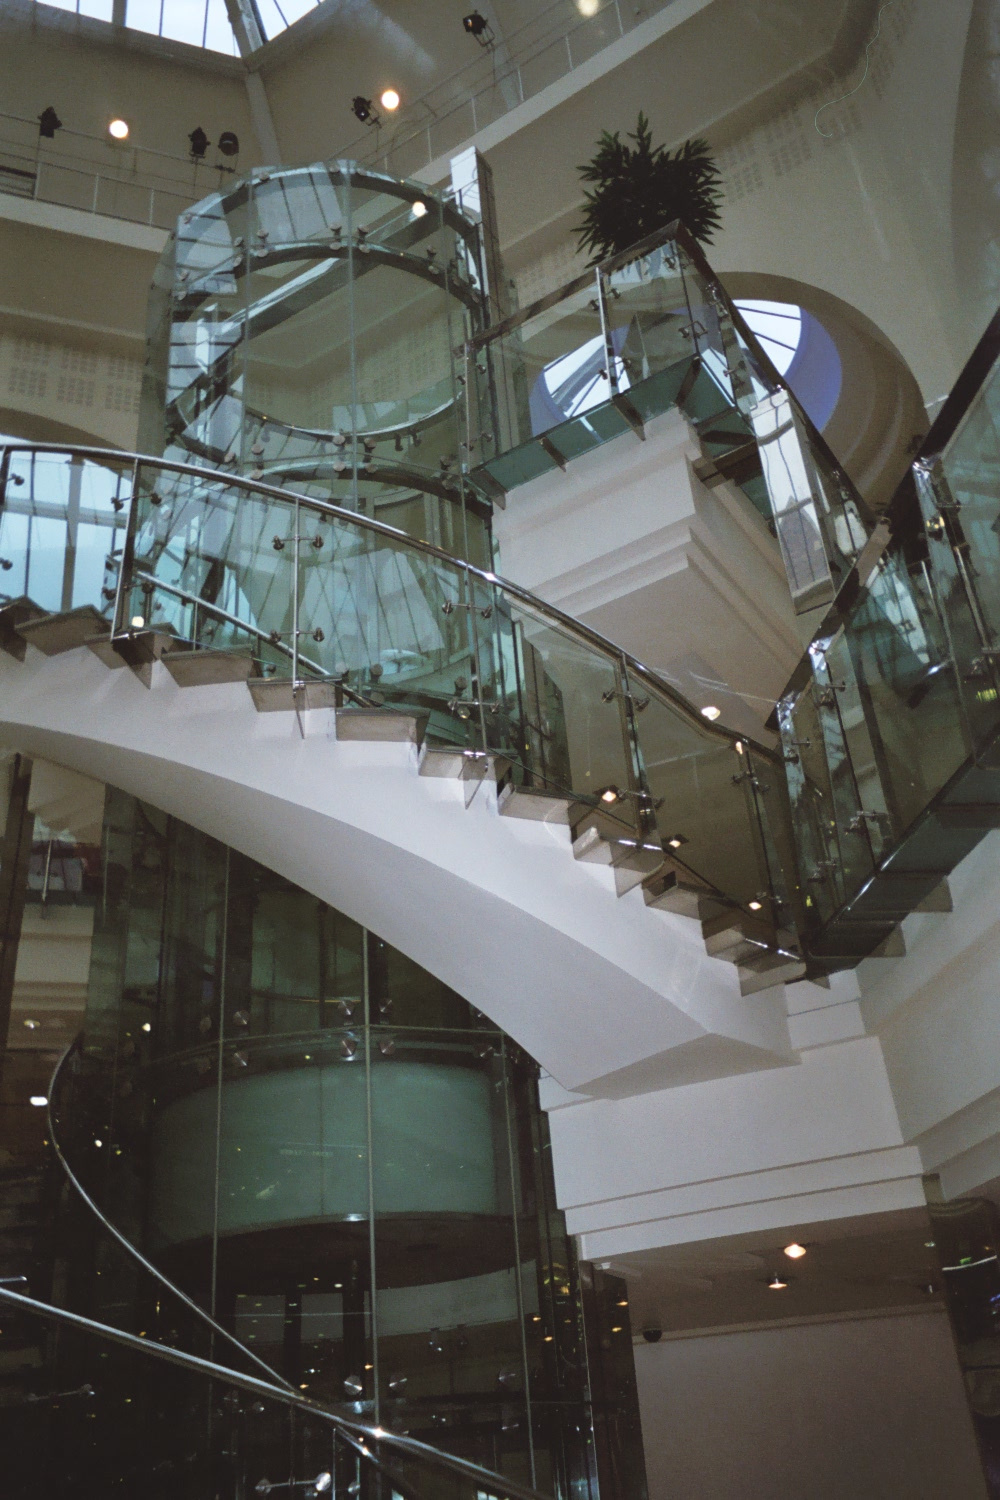 Lift and stairs in the Triangle/Corn Exchange, Manchester